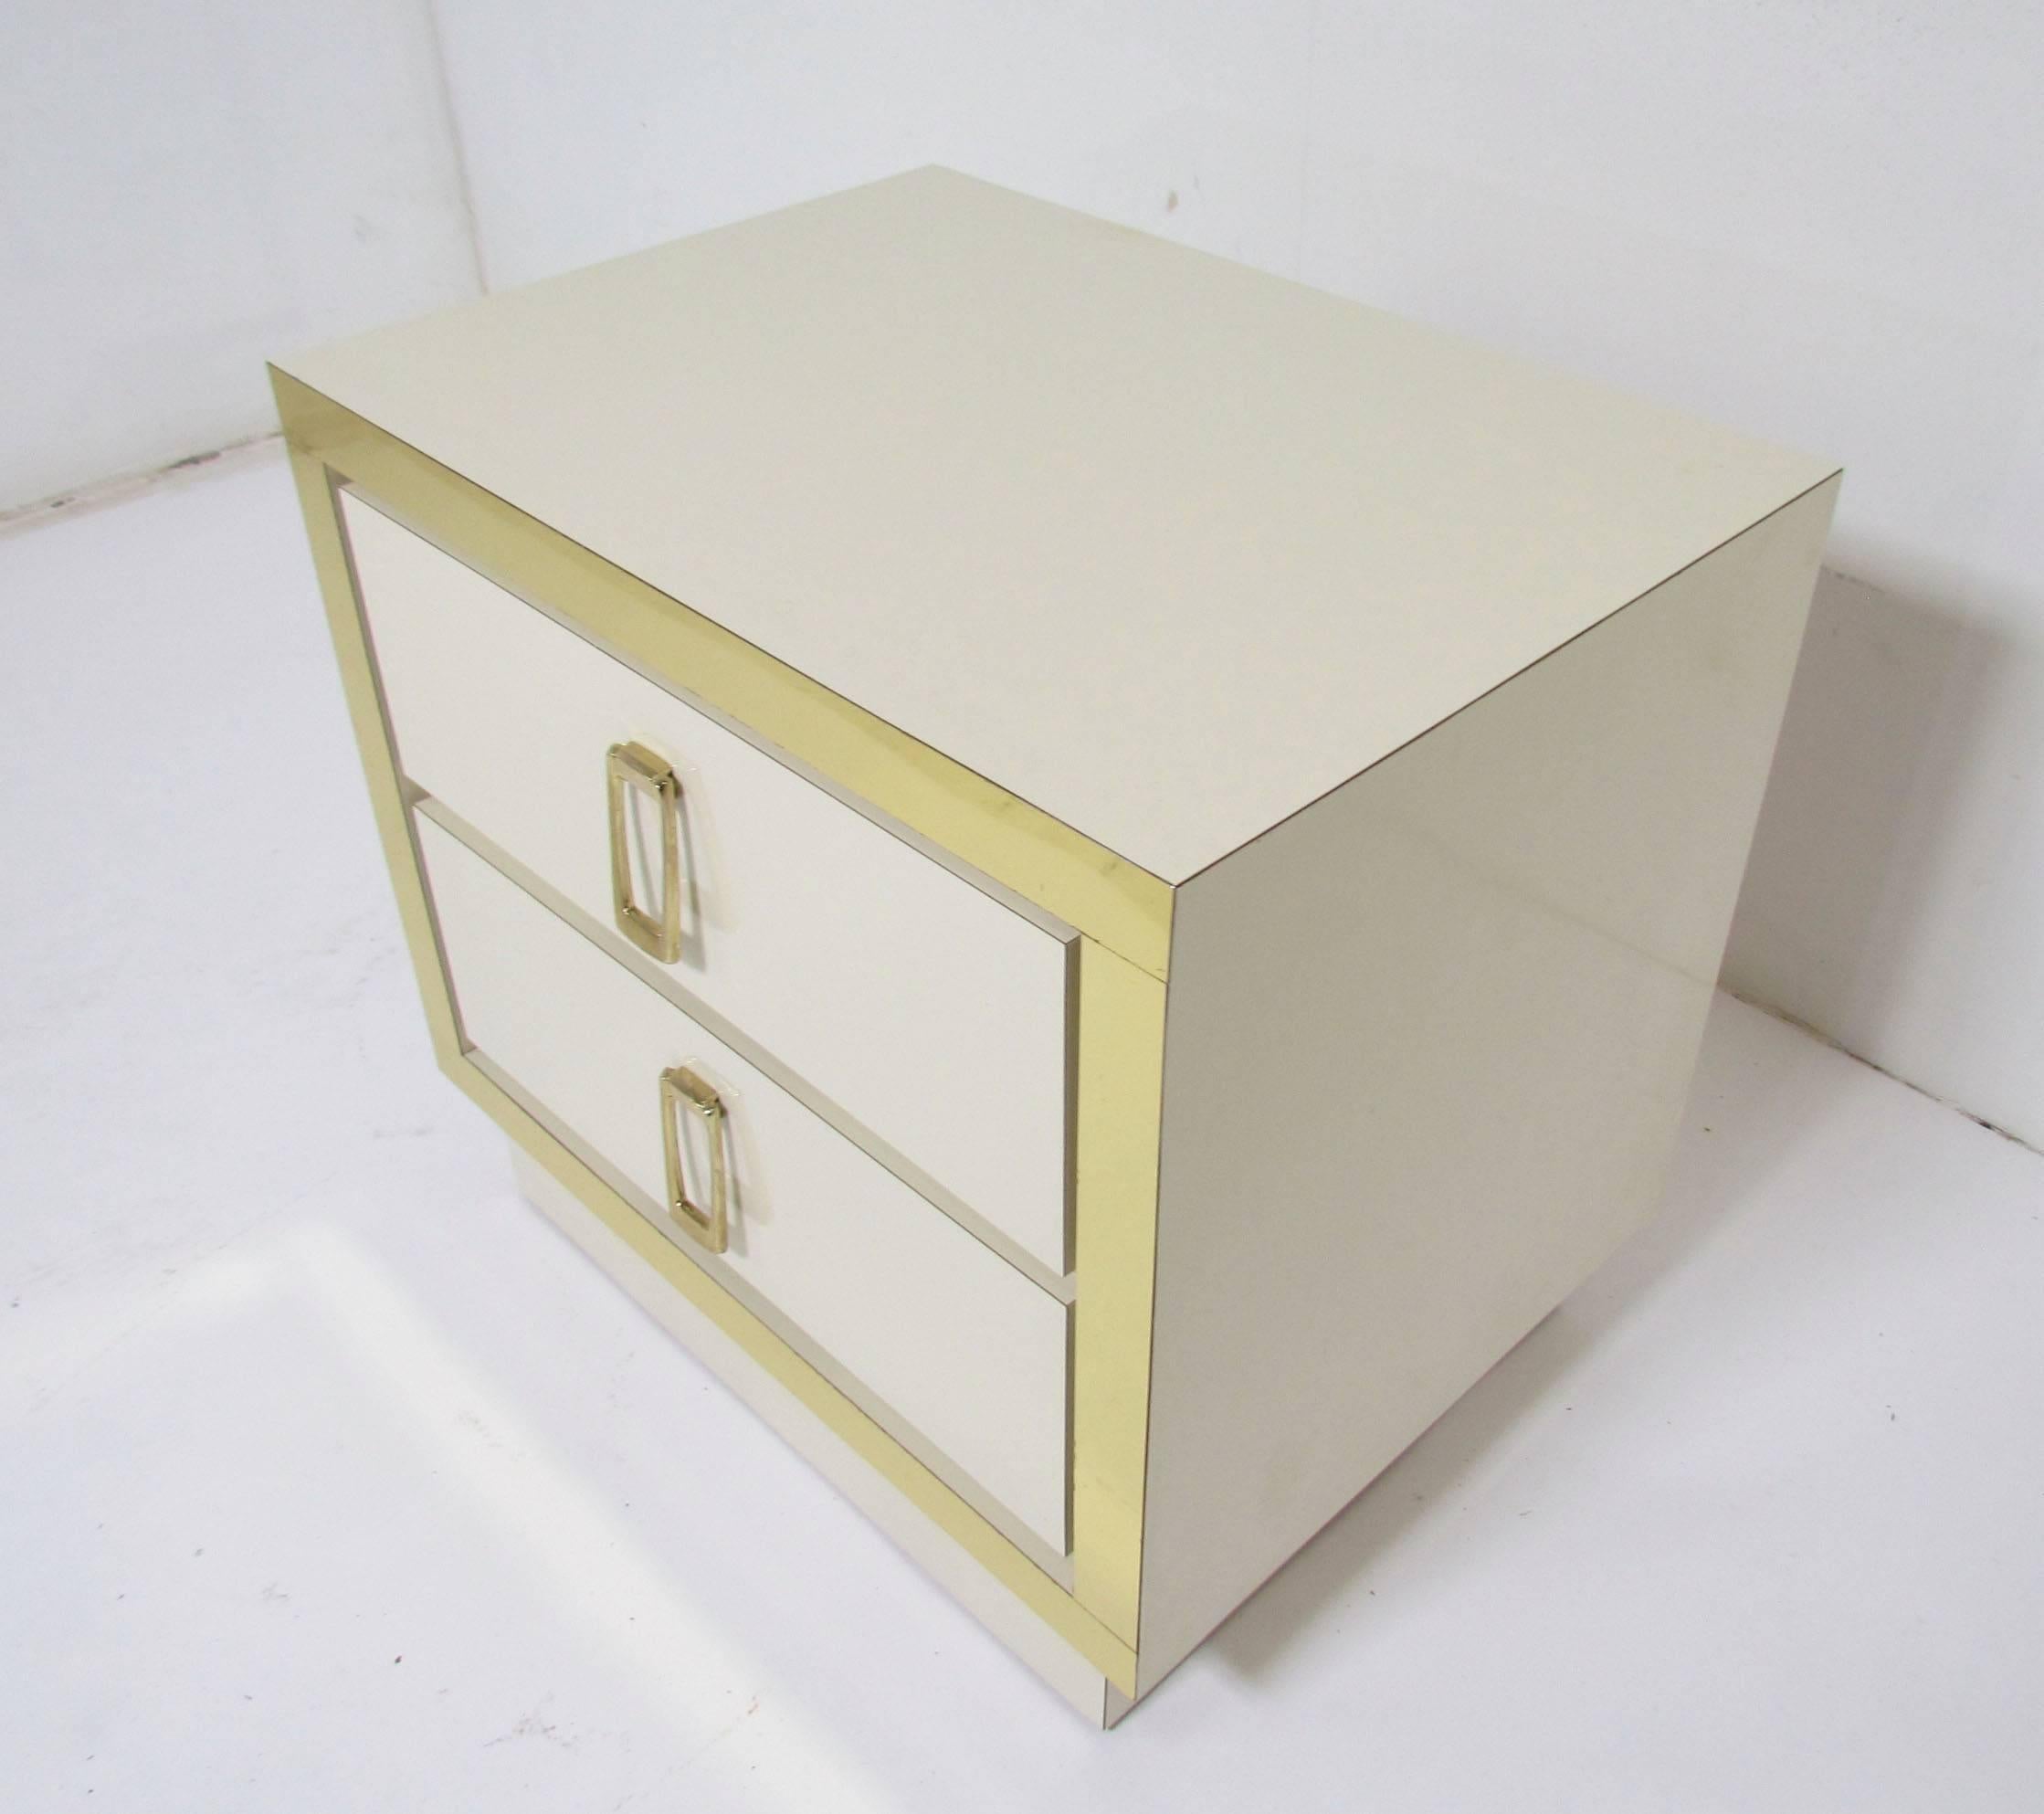 American Pair of Hollywood Regency Style Nightstands with Brass Hardware